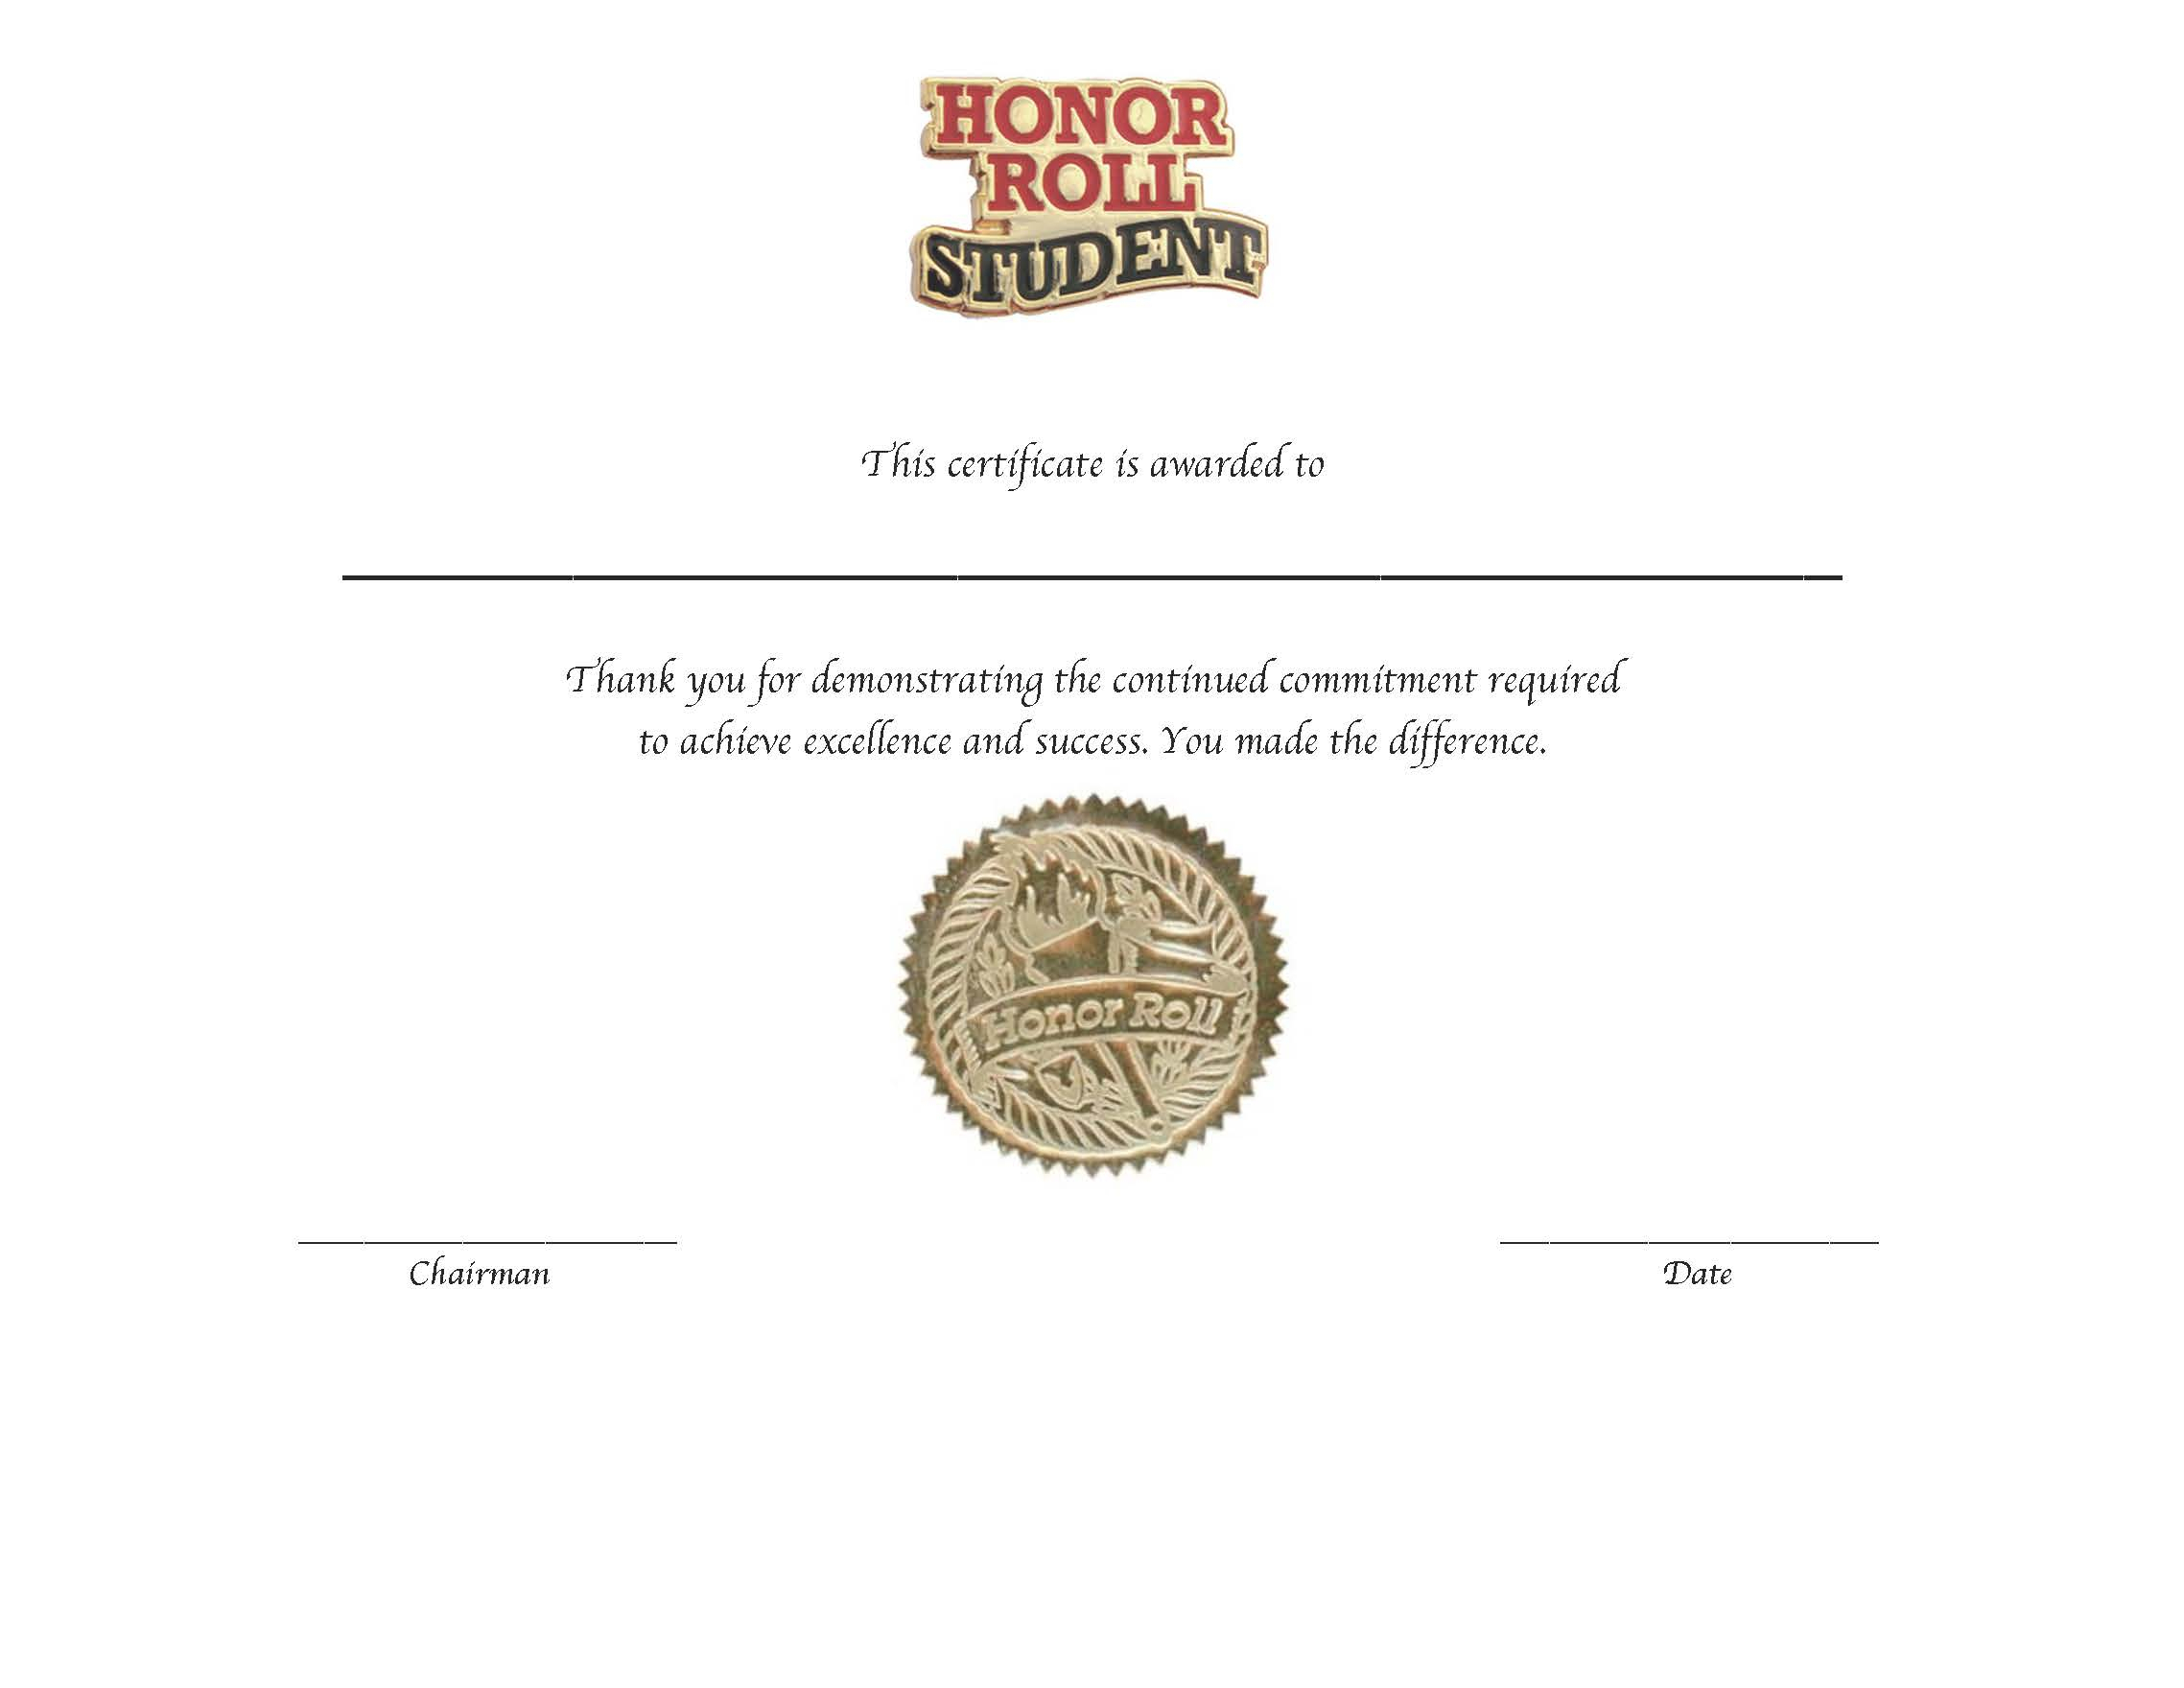 Honor Roll Certificate Template Word ] – Free Downloadable With Regard To Honor Roll Certificate Template